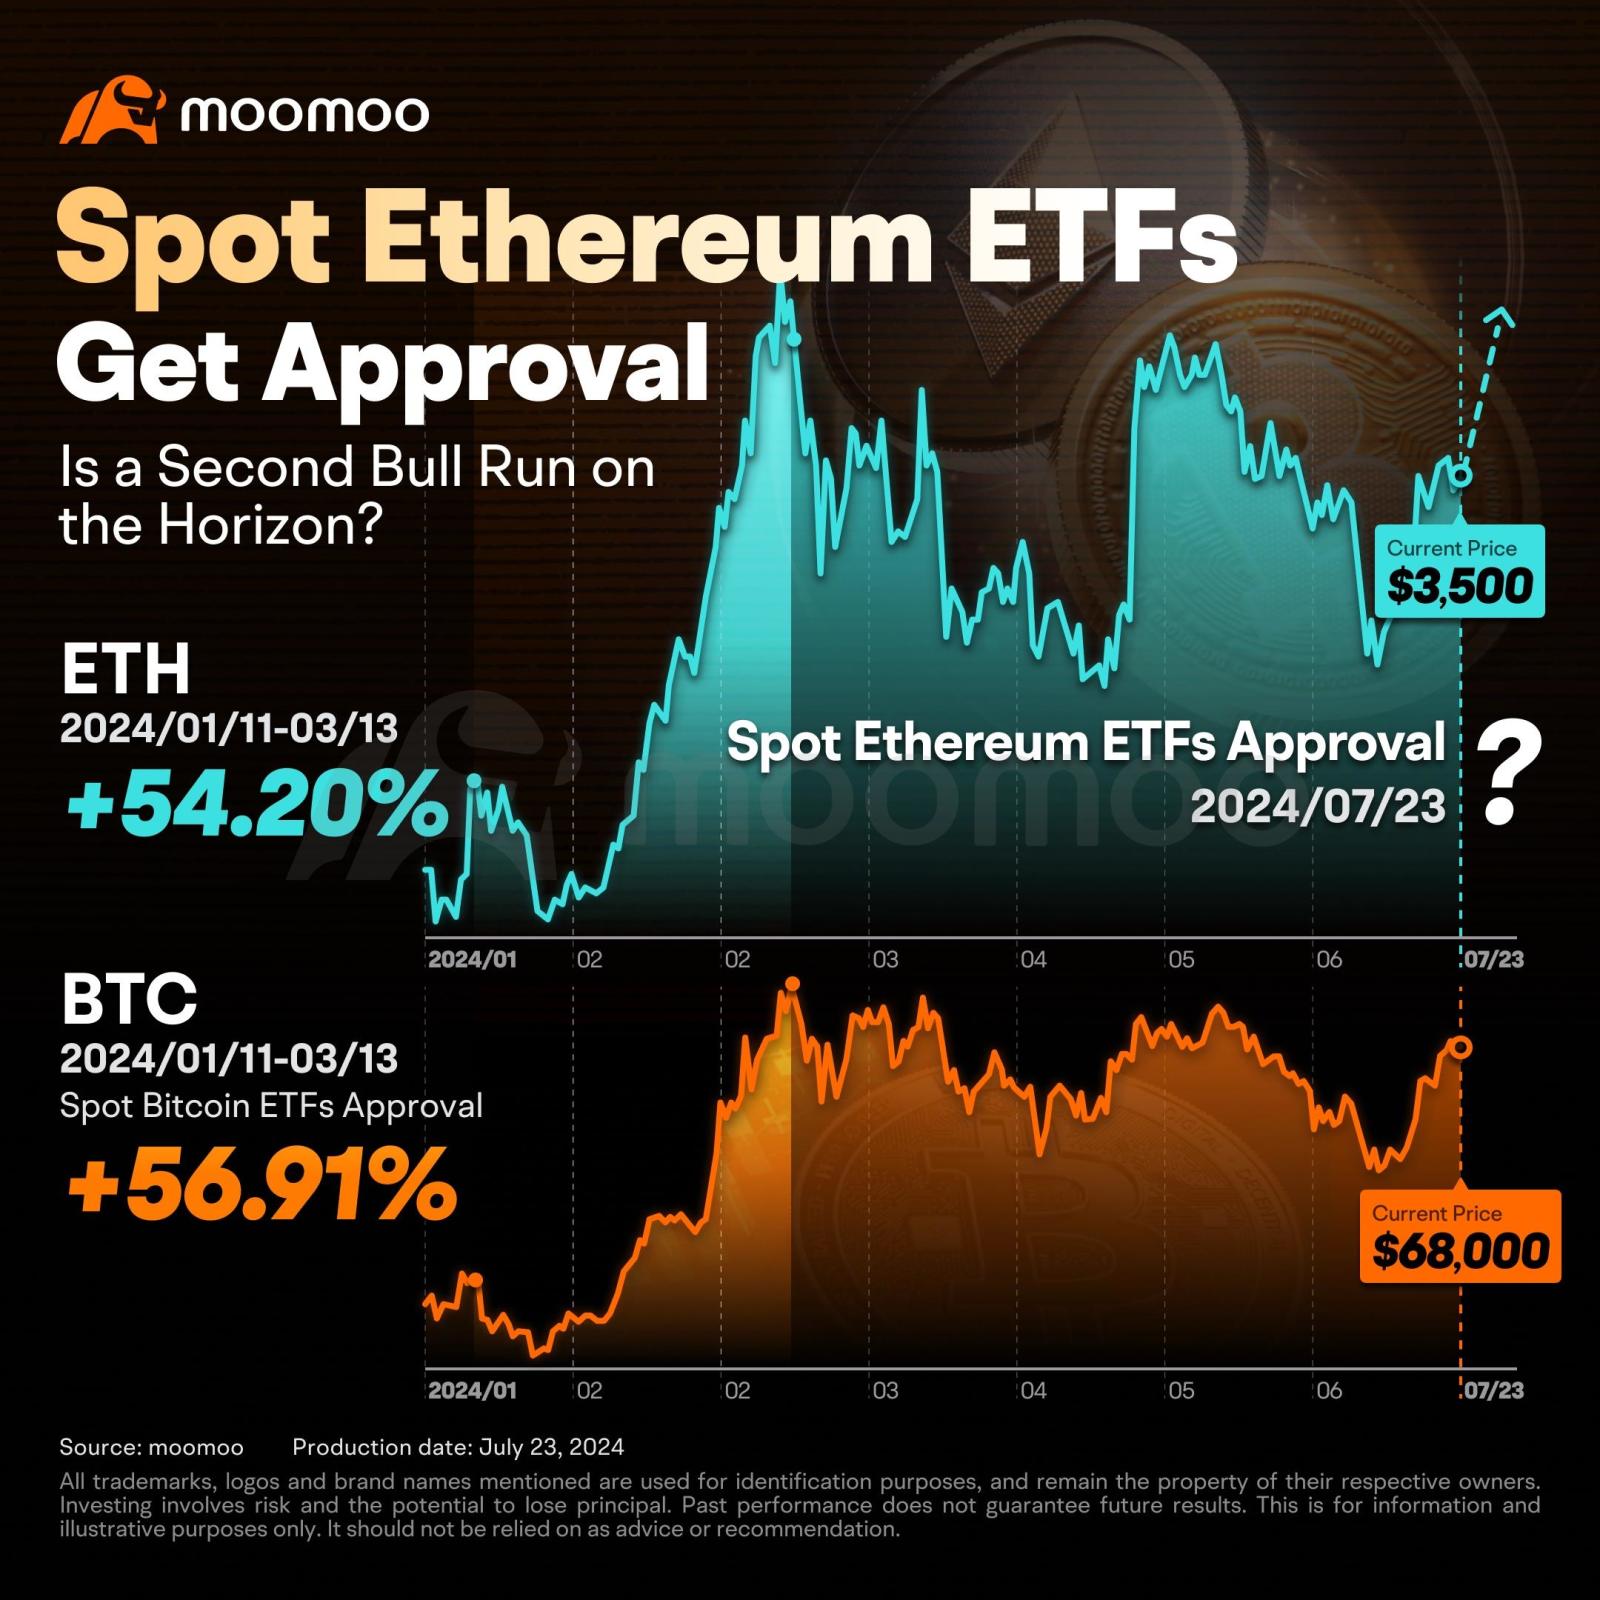 Spot Ethereum ETFs Get Final Approval: Is a Second Bull Run on the Horizon?